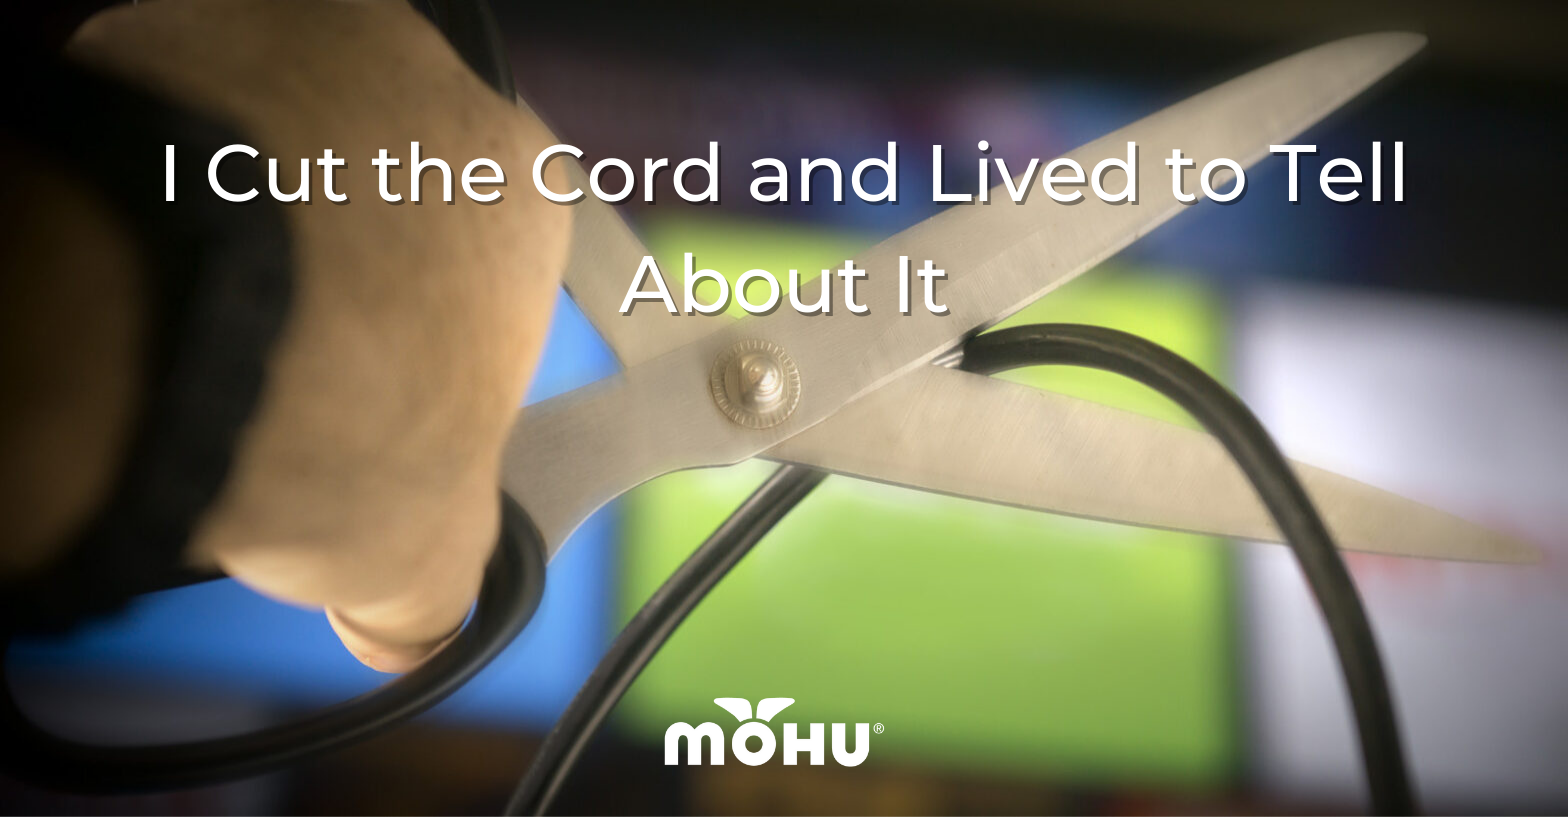 hands holding scissors, cutting a cord, I Cut the Cord and Lived to Tell About It, Mohu